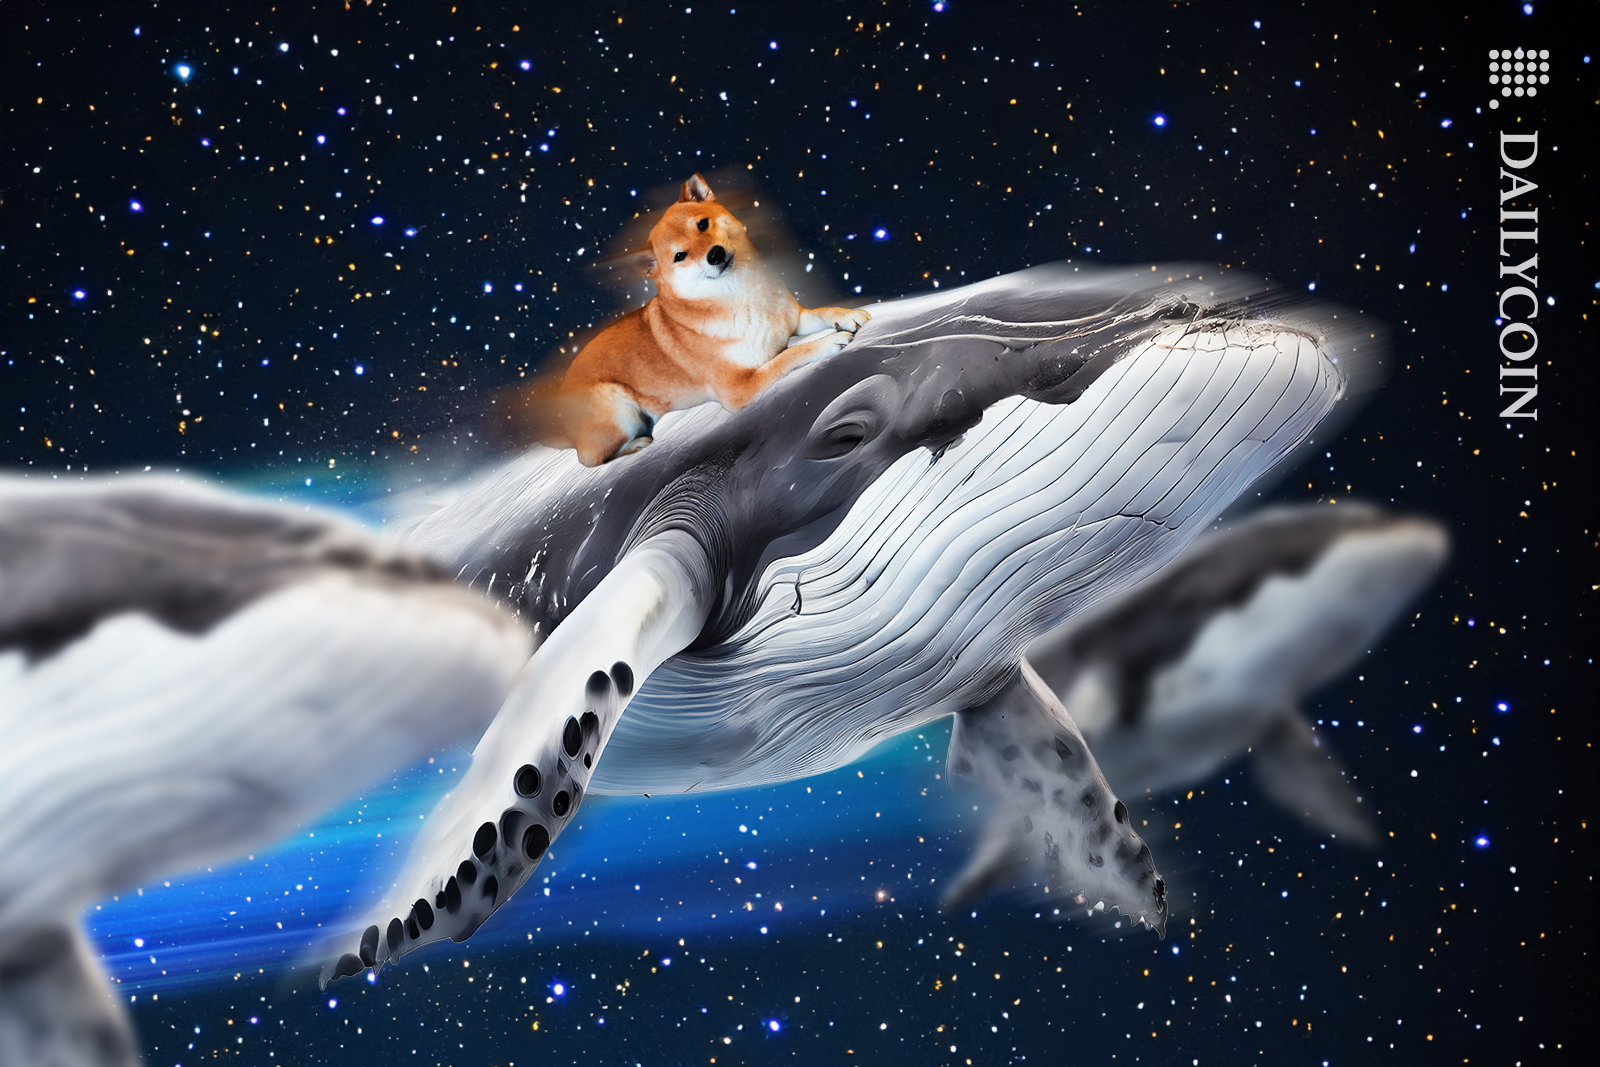 Shiba inu riding the whales in space.